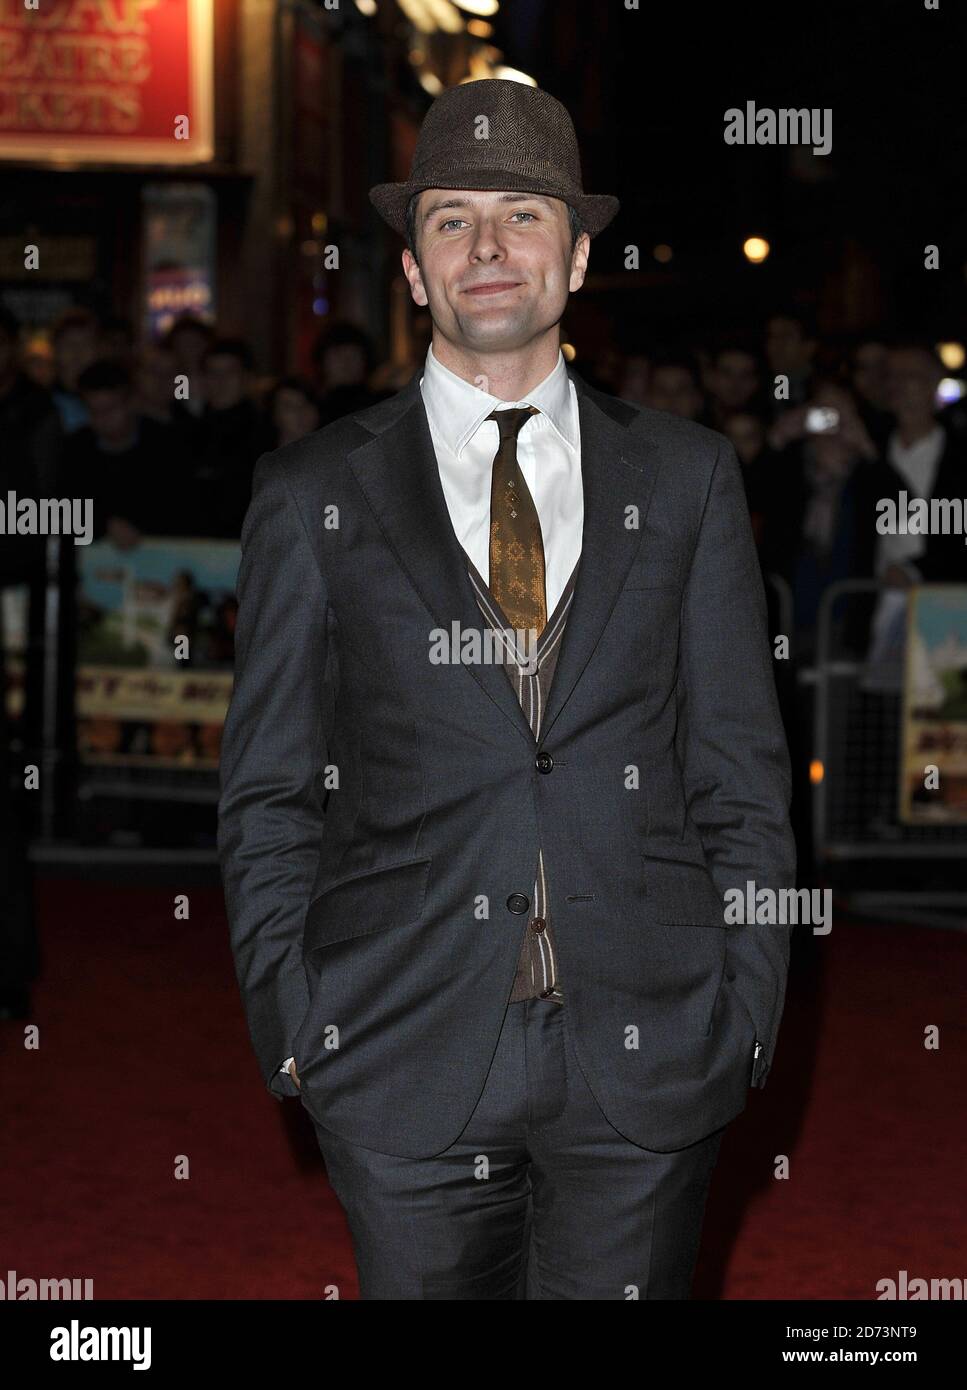 Edward Hogg arrives for the premiere of Bunny and Bull at the Vue cinema in Leicester Square, London, as part of the BFI 53rd London Film Festival. Stock Photo